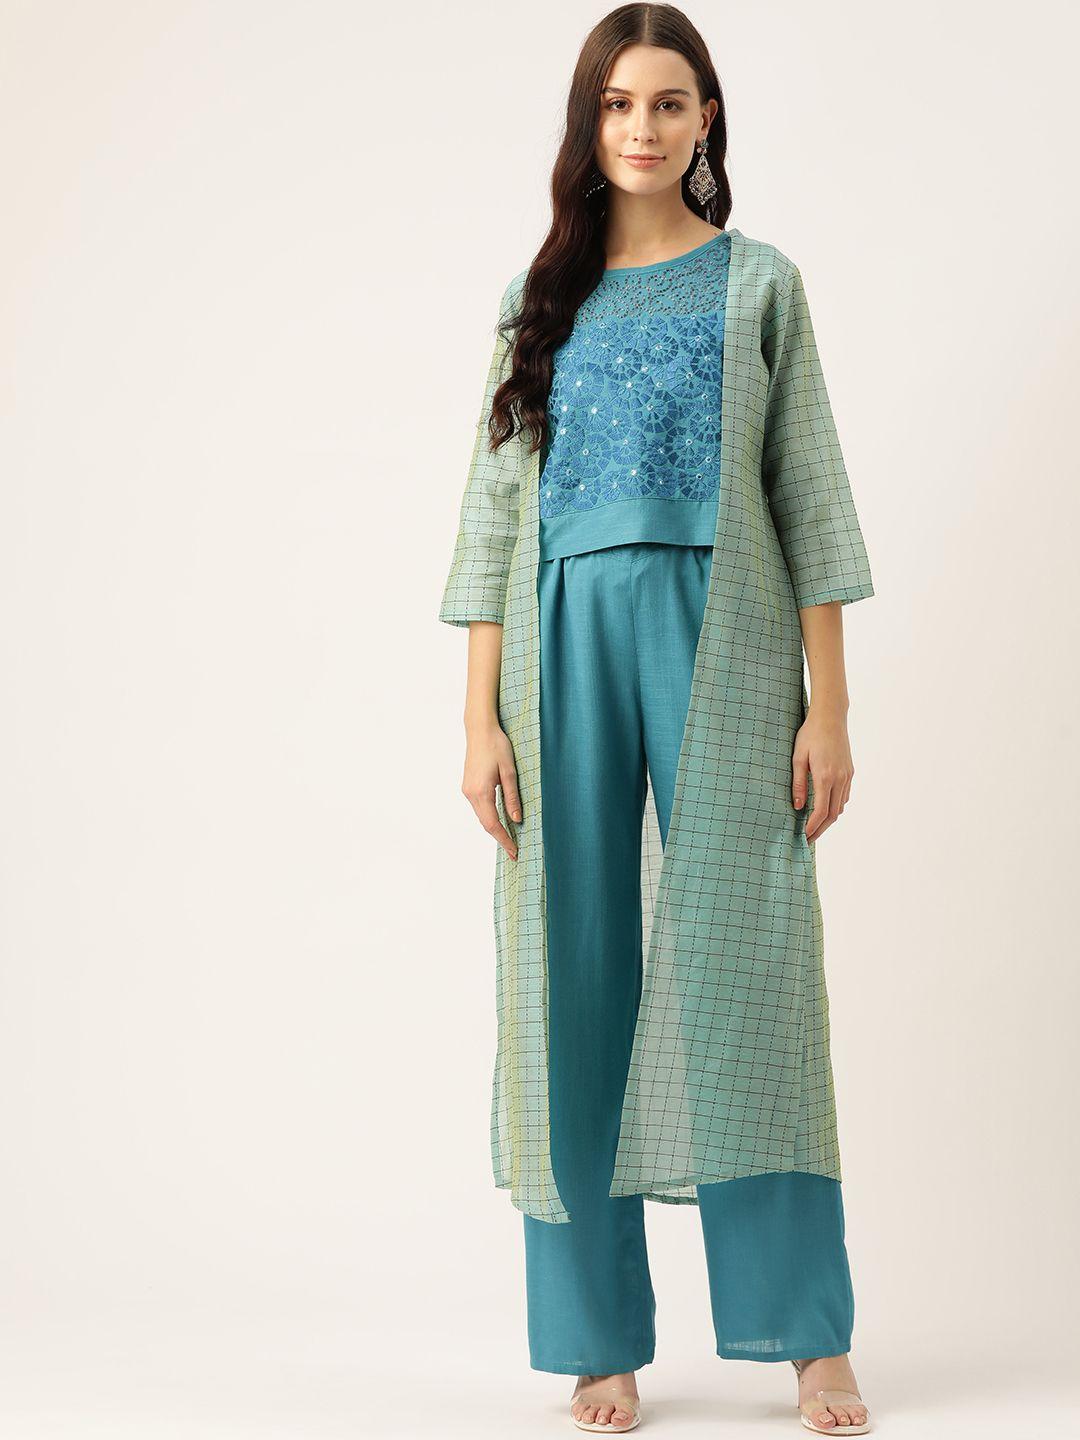 rue collection embroidered ethnic co-ords with shrug